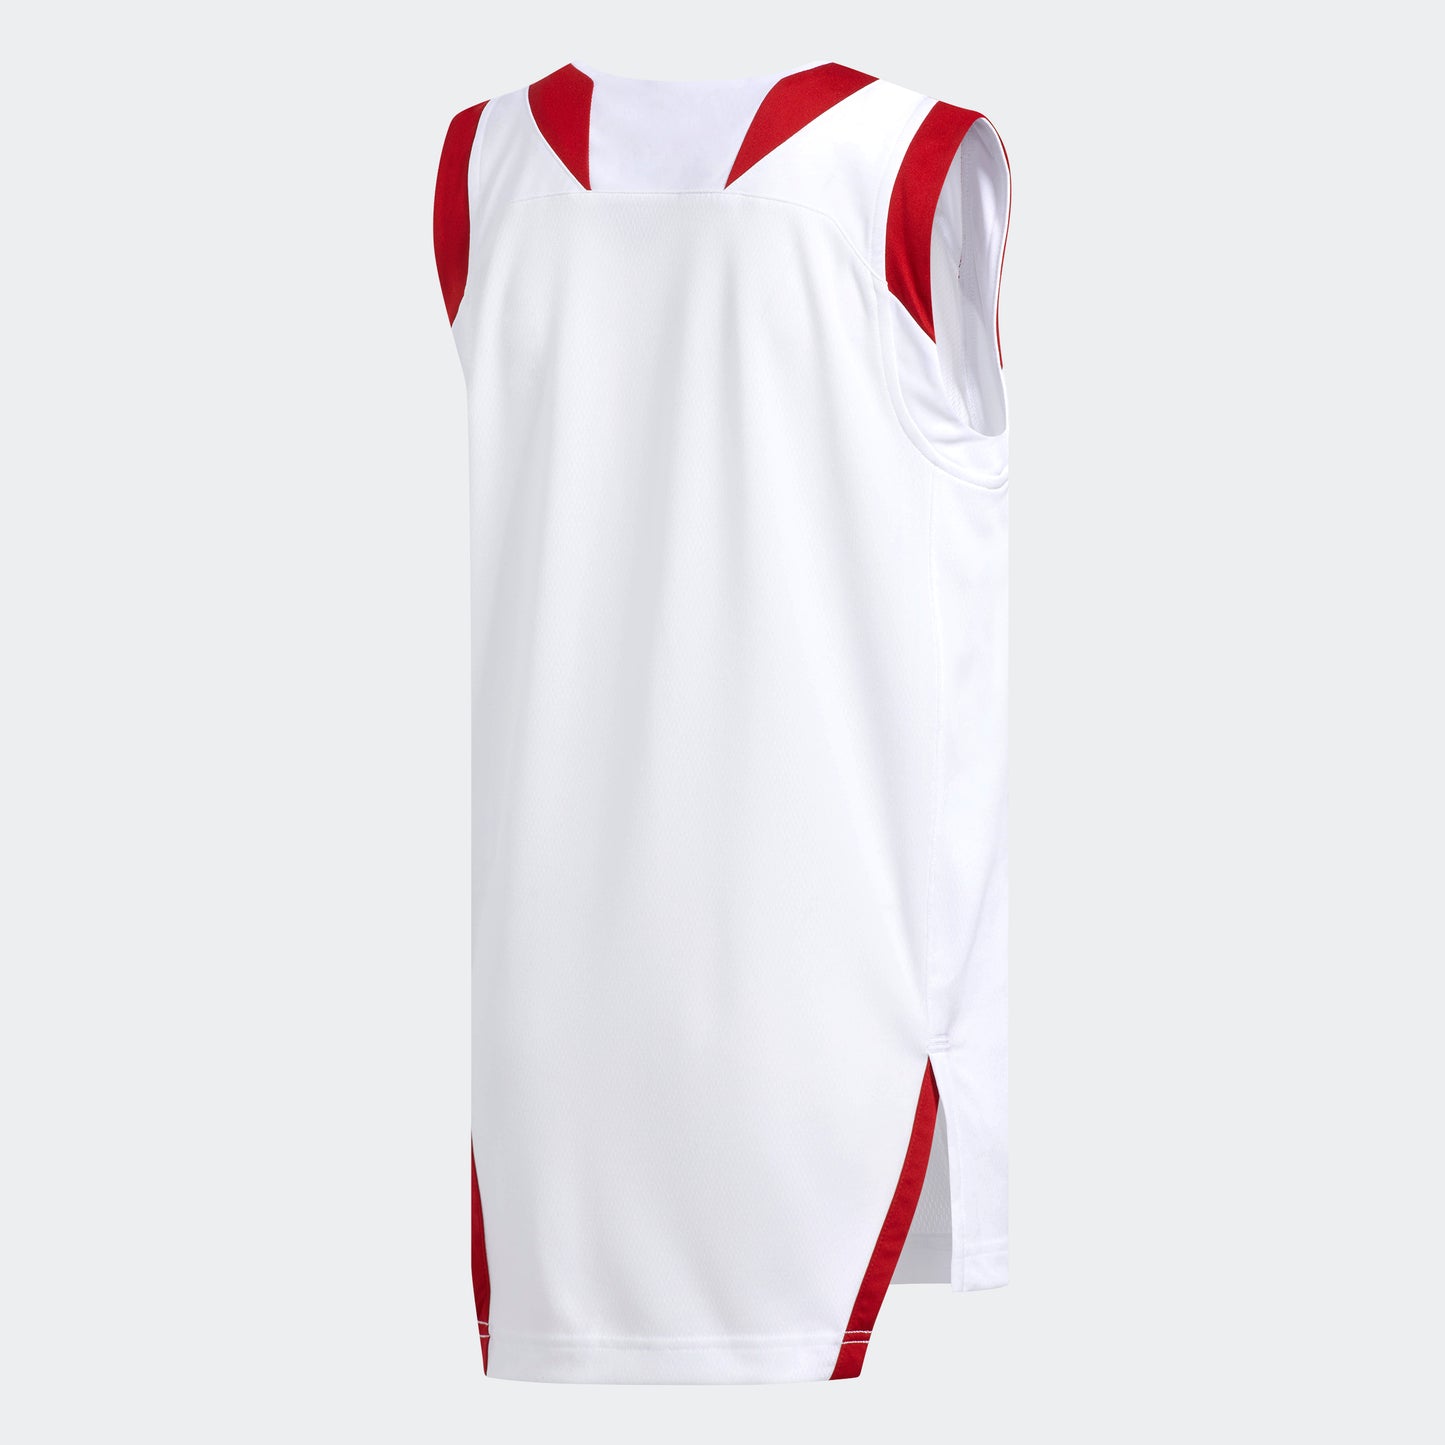 adidas CRAZY EXPLOSIVE Basketball Jersey | White | Youth